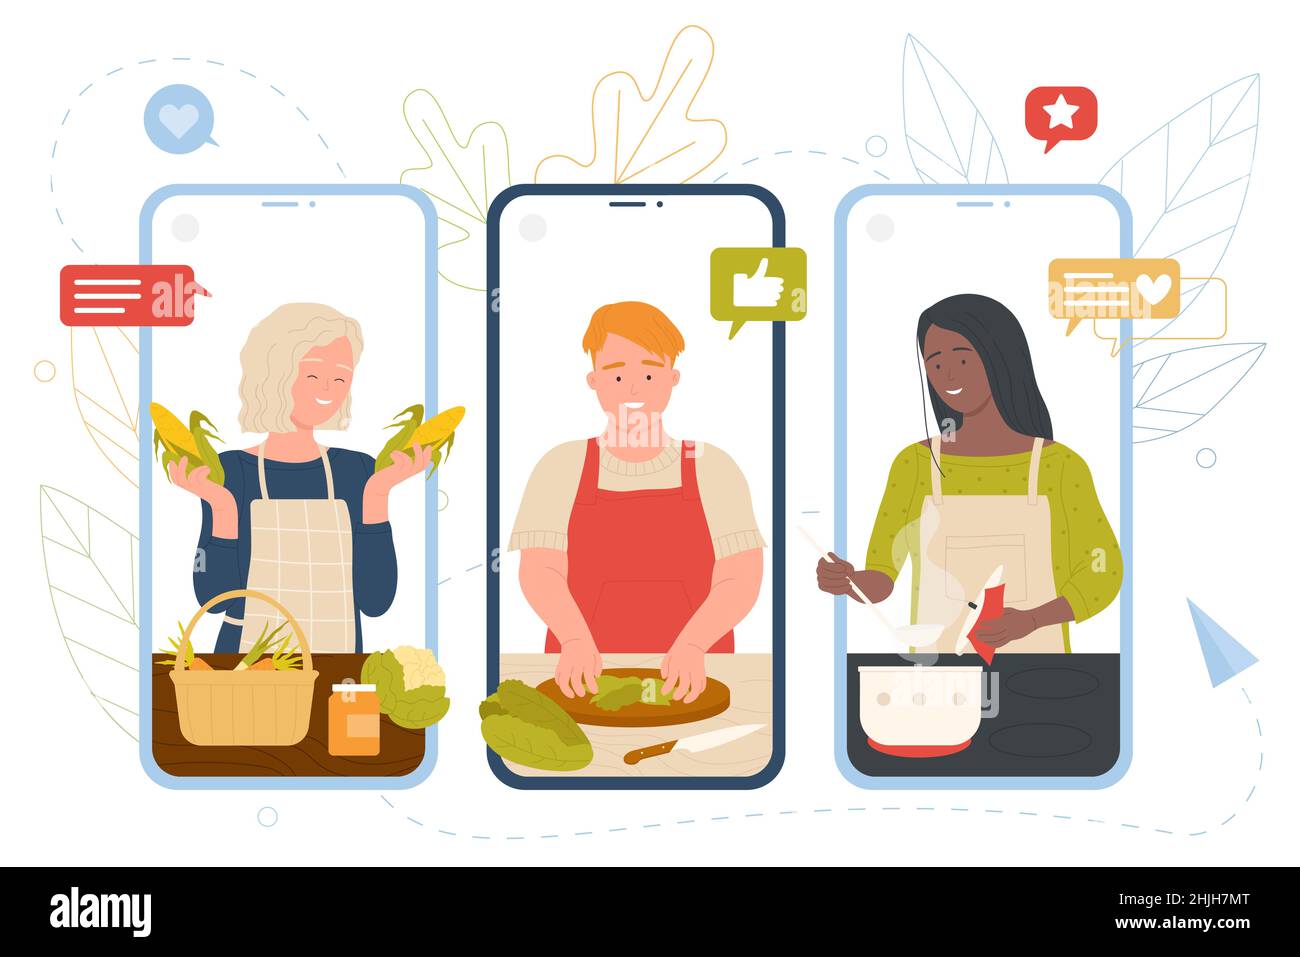 People cooking online on screens of mobile phones vector illustration. Cartoon chef woman and man holding, slicing vegetables to make healthy soup recipe from blog. Cooking service, culinary concept Stock Vector